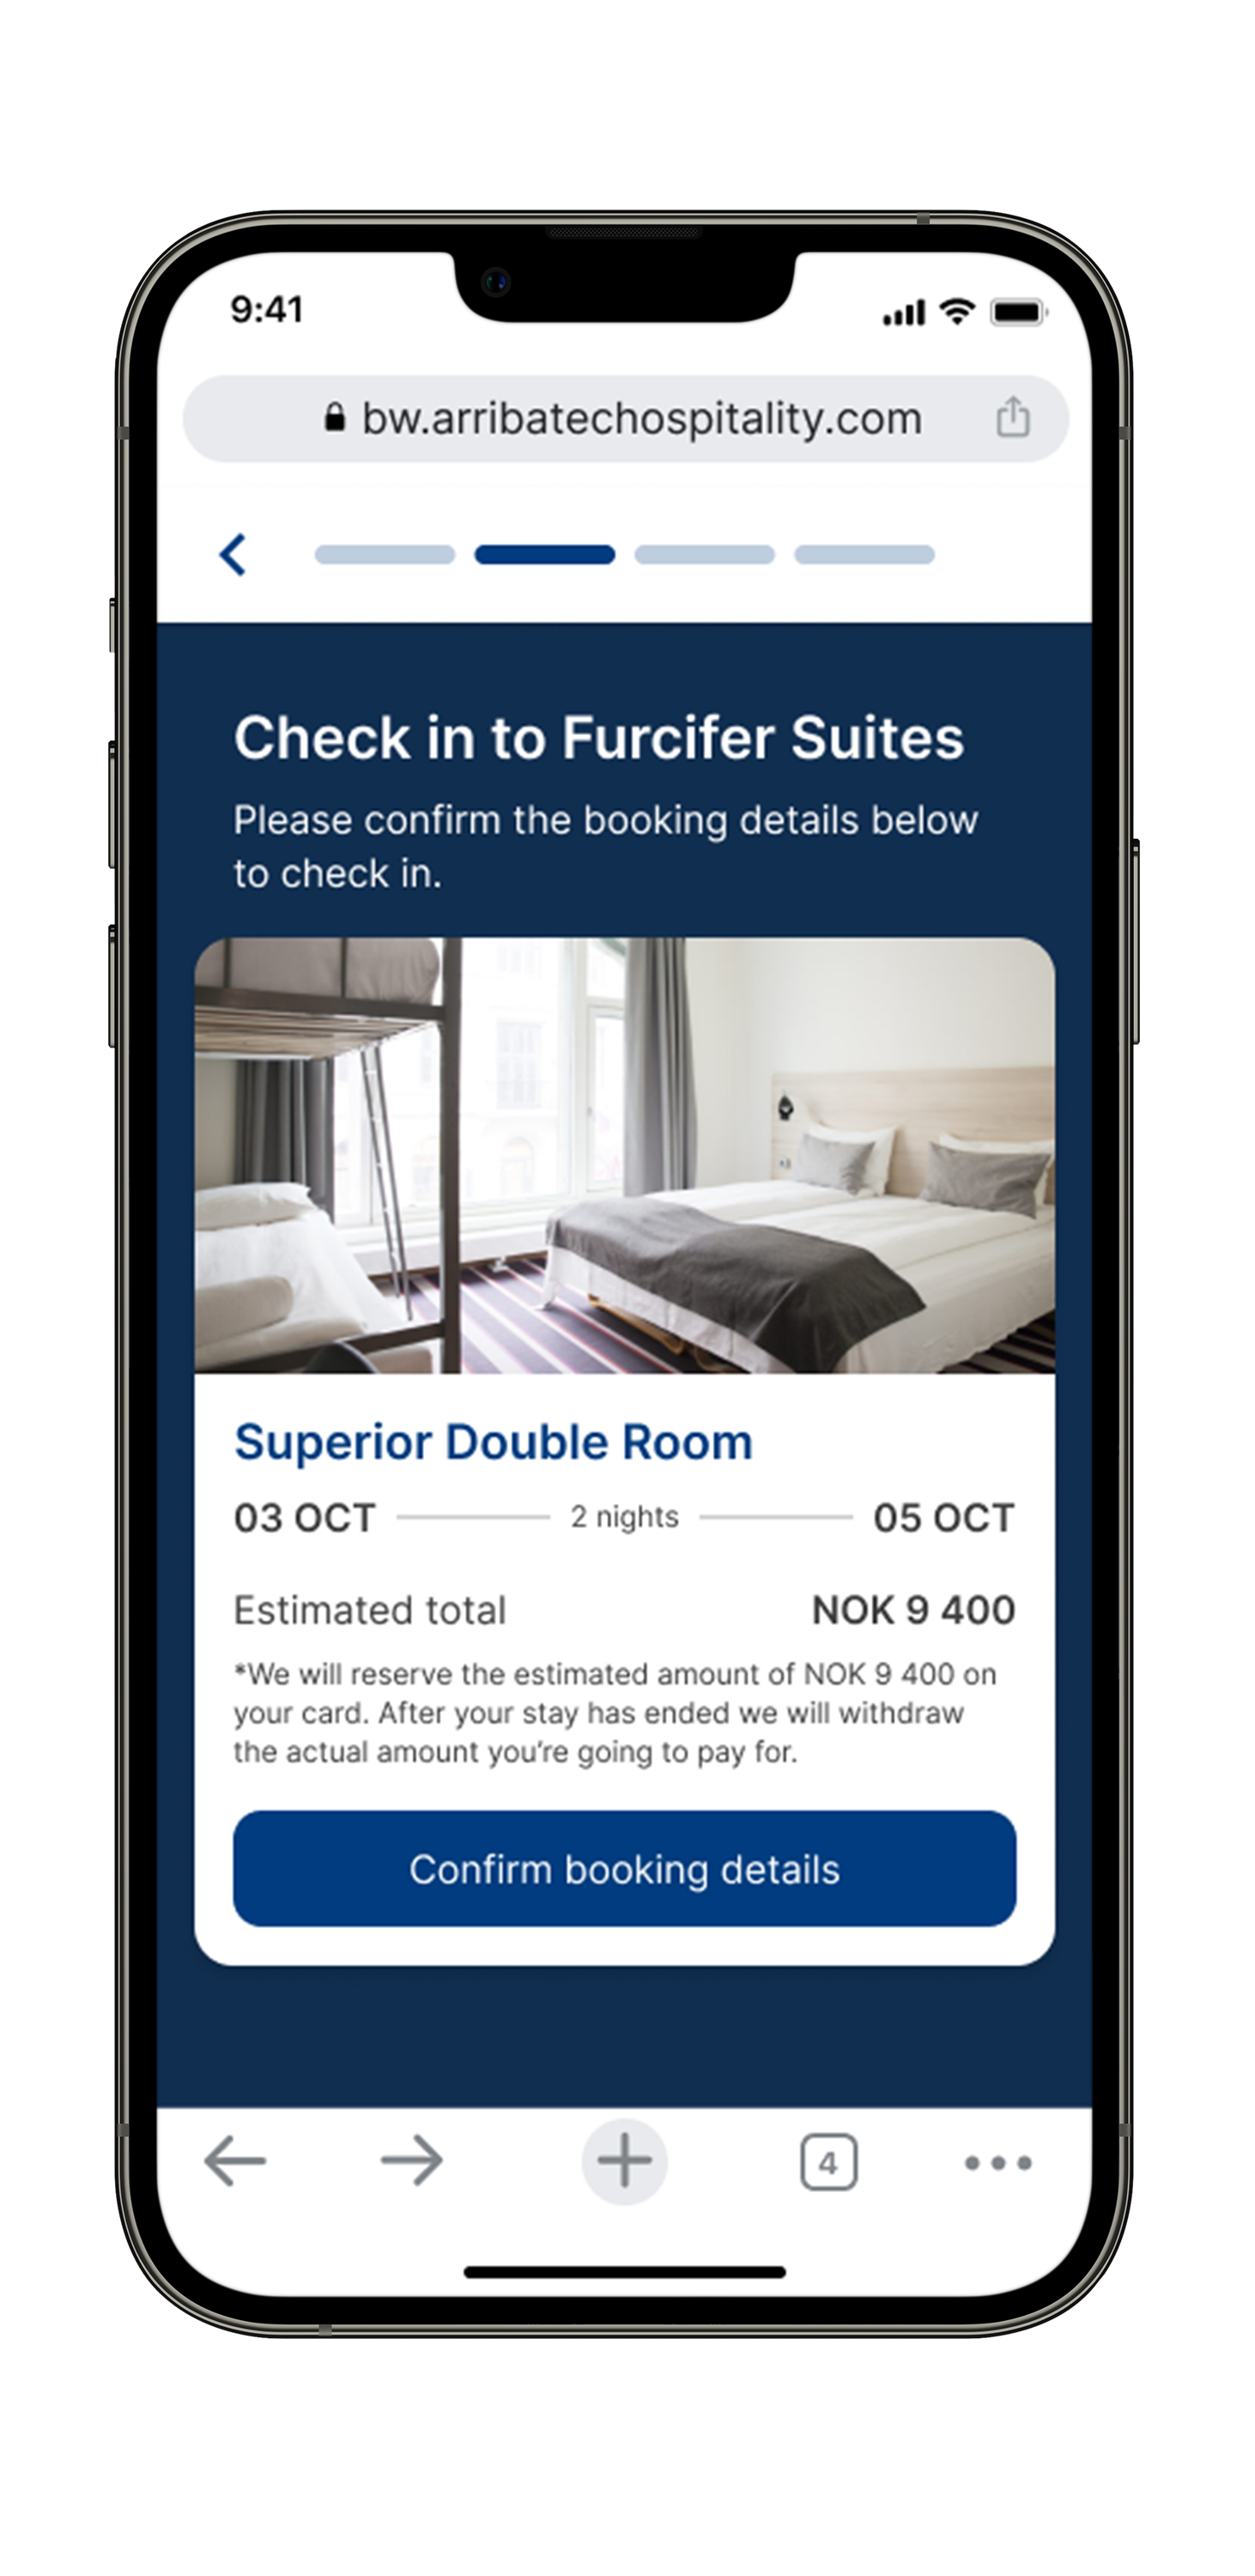 Appless mobile check-in app for hotels